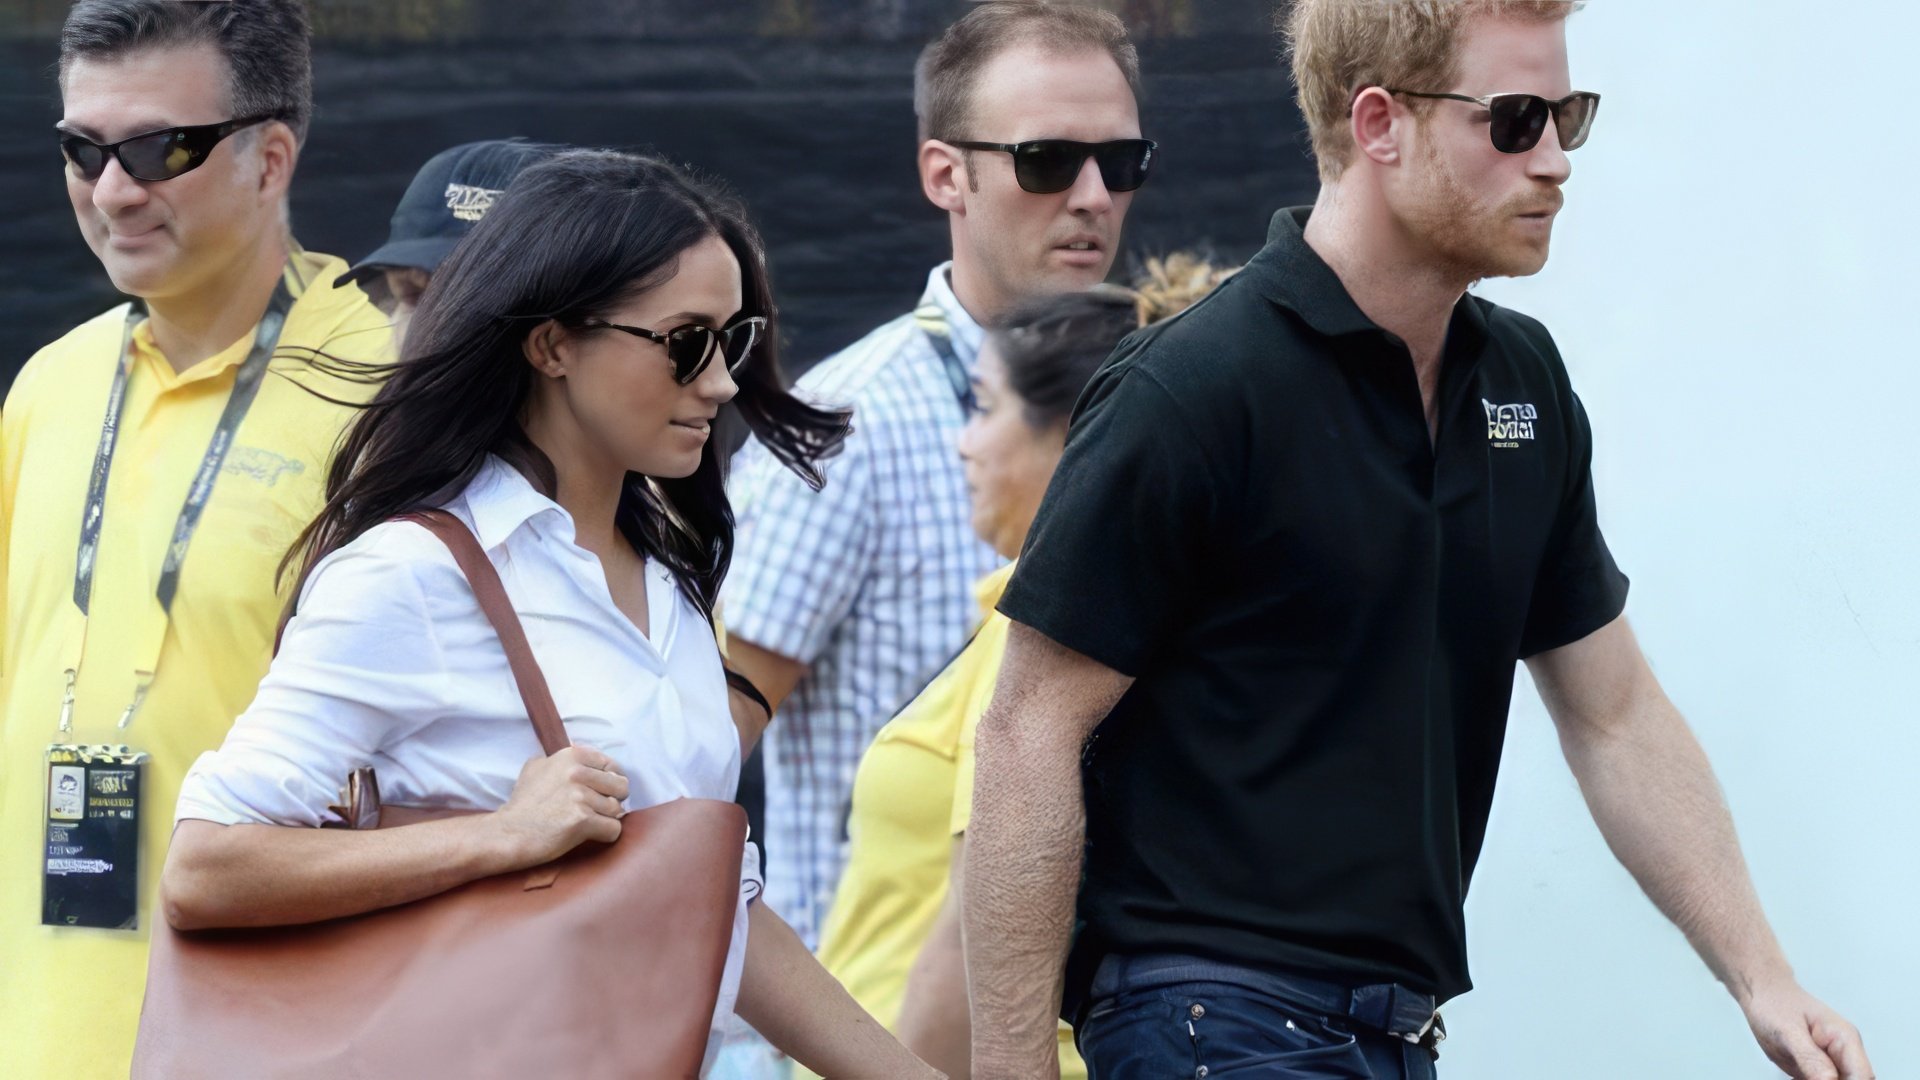 Rumours about Meghan Markle dating Prince came up in the beginning of 2016